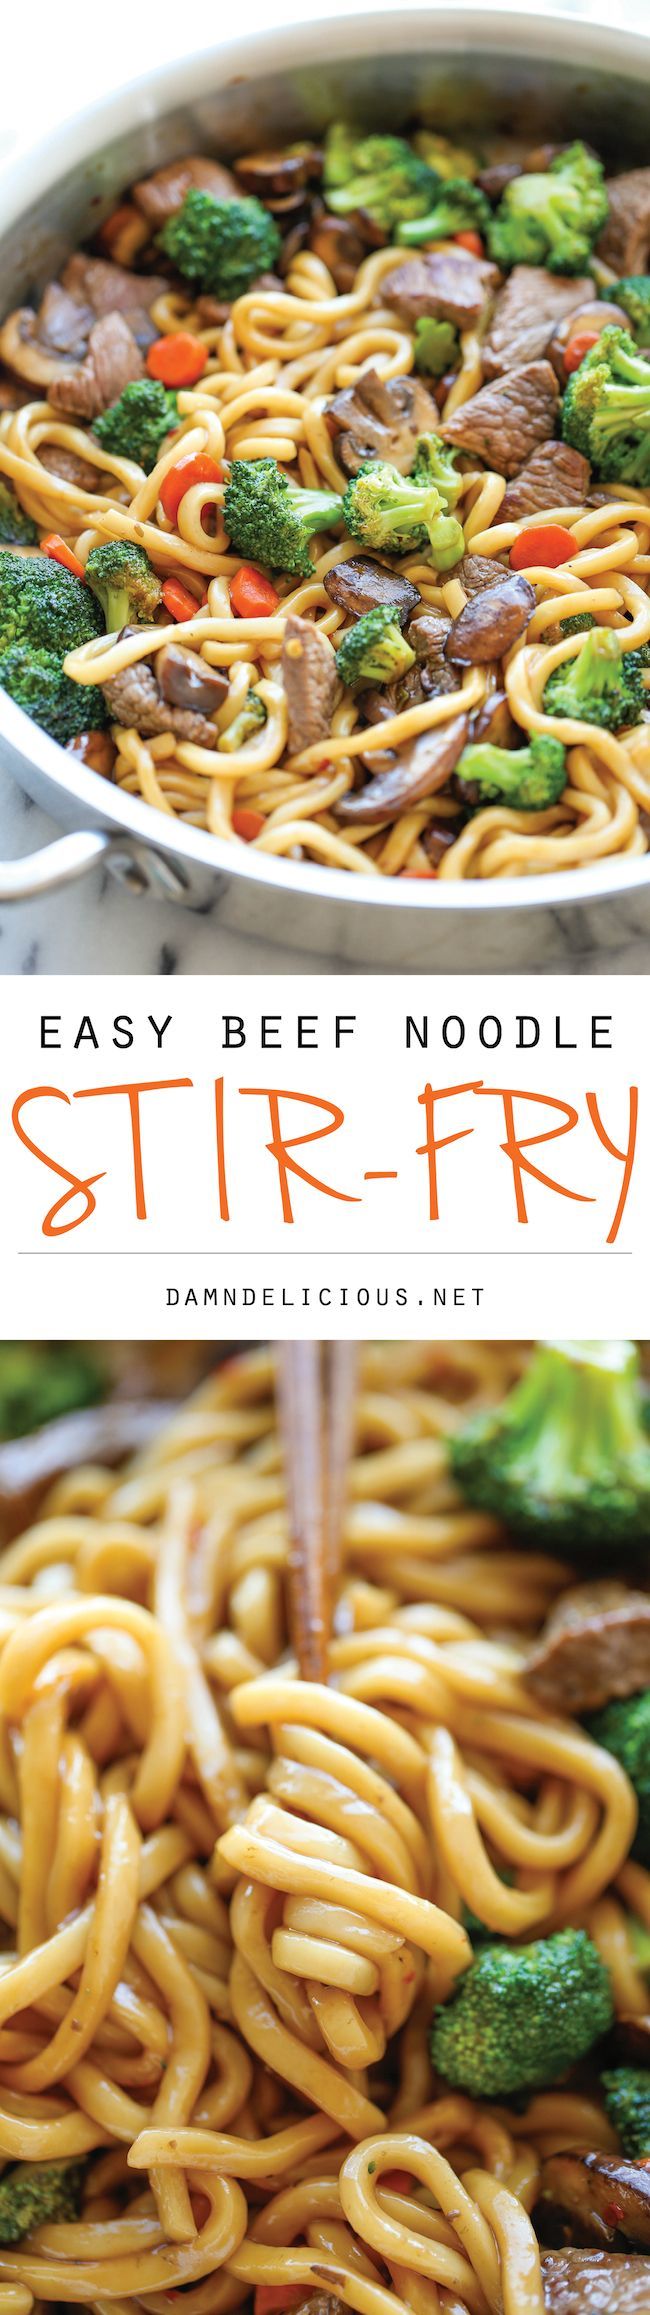 Beef Noodle Stir Fry – The easiest stir fry ever! And you can add in your favorite veggies, making this to be the perfect